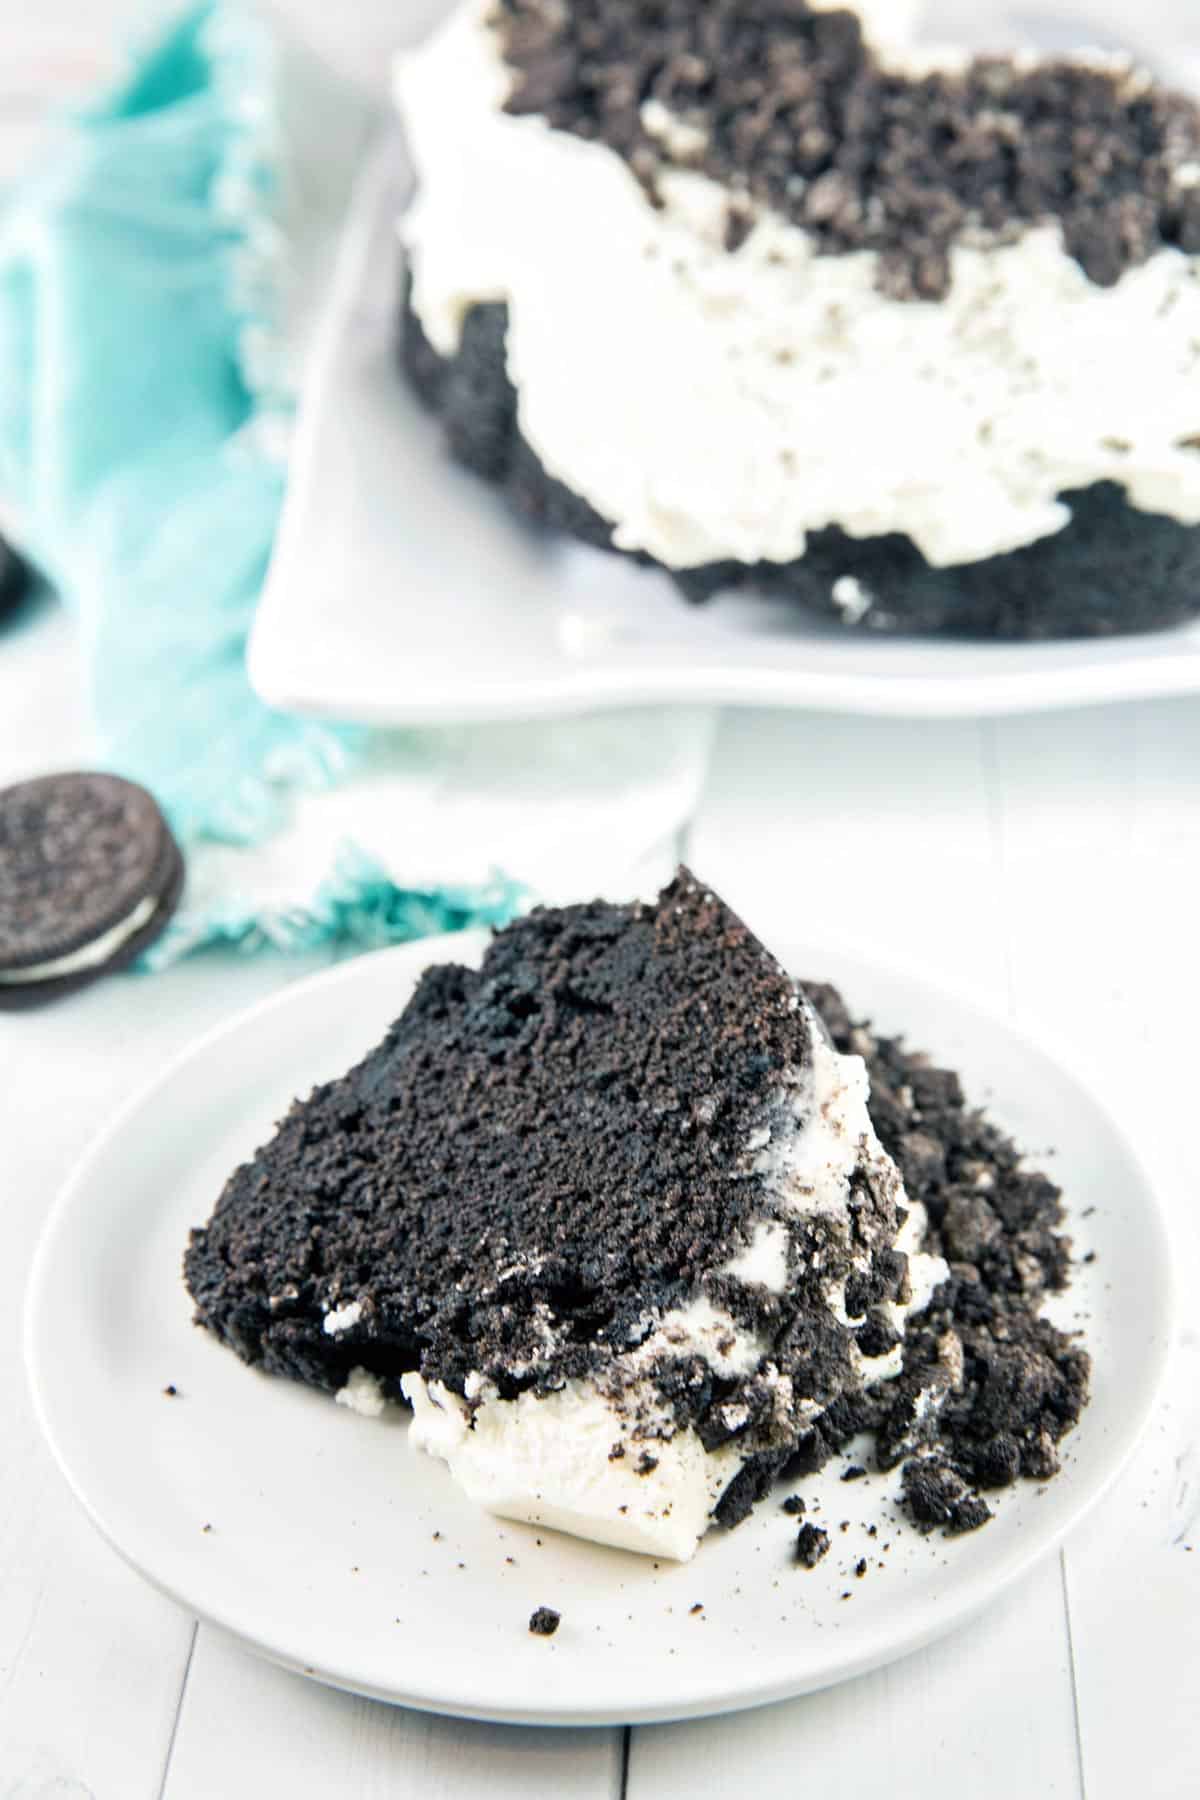 slice of oreo bundt cake on its side on a plate with blue dishcloth in background